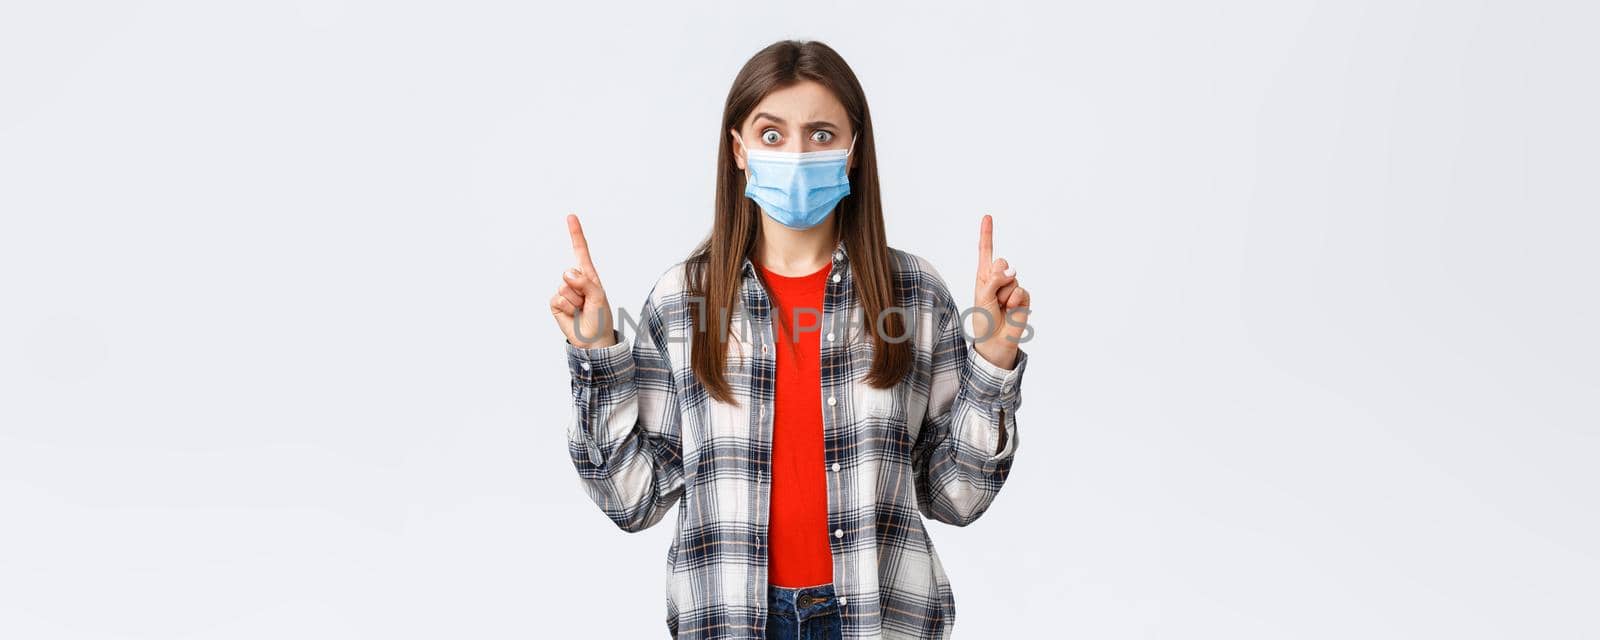 Coronavirus outbreak, leisure on quarantine, social distancing and emotions concept. Concerned and puzzled young woman in medical mask pointing fingers up at strange, confusing promo by Benzoix